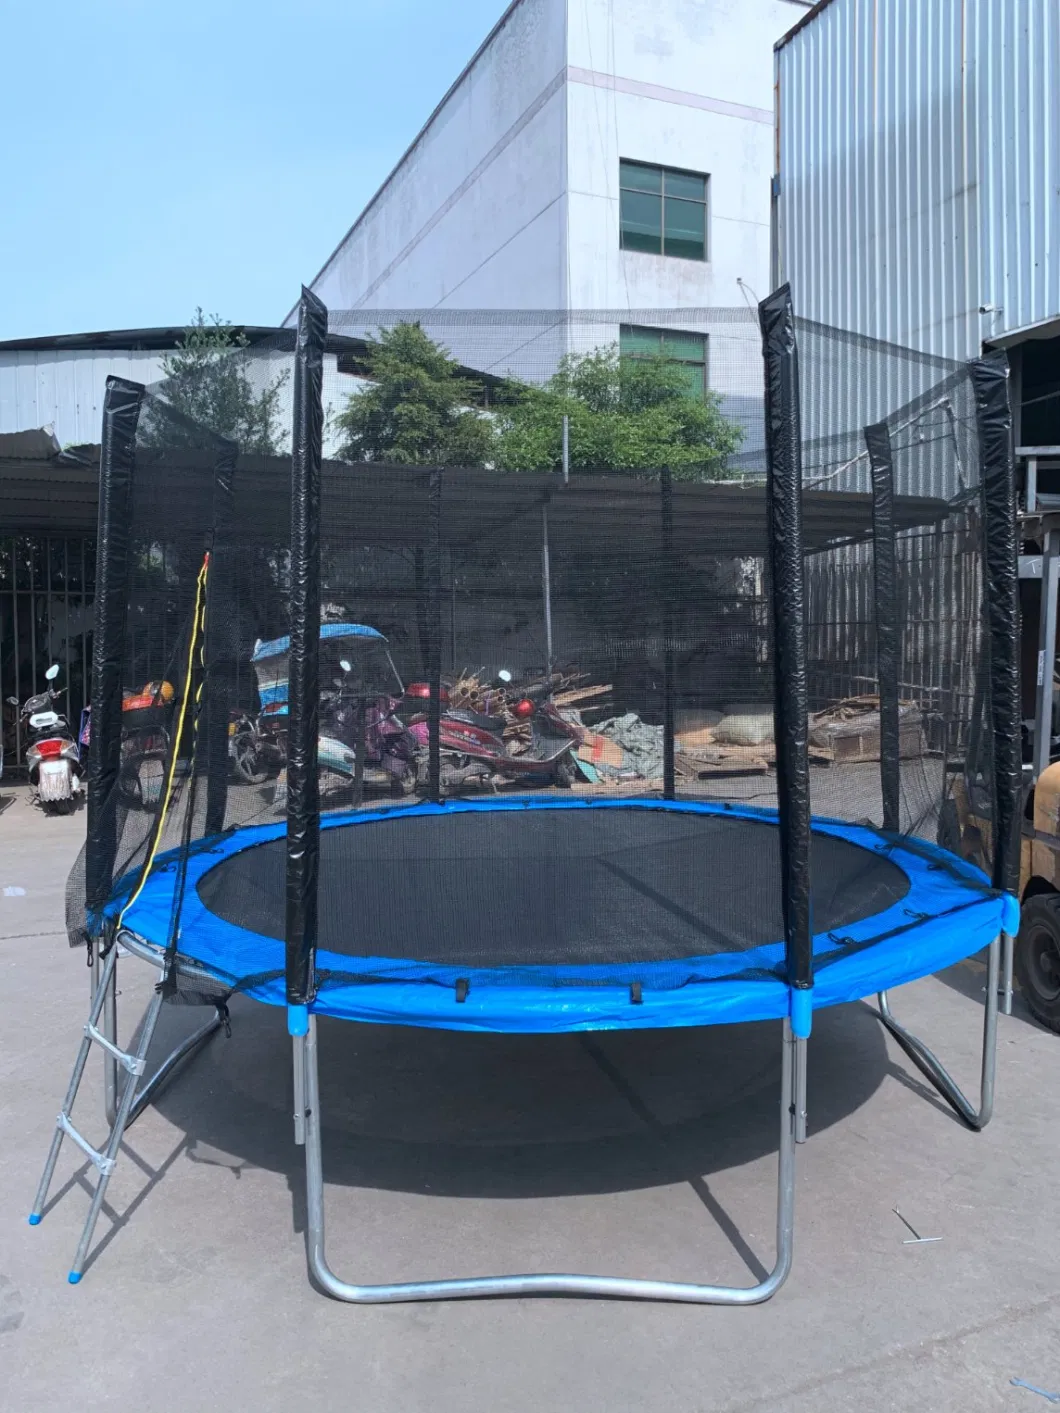 Nanjian High Quality 10ft Outdoor Round Trampoline with Enclose